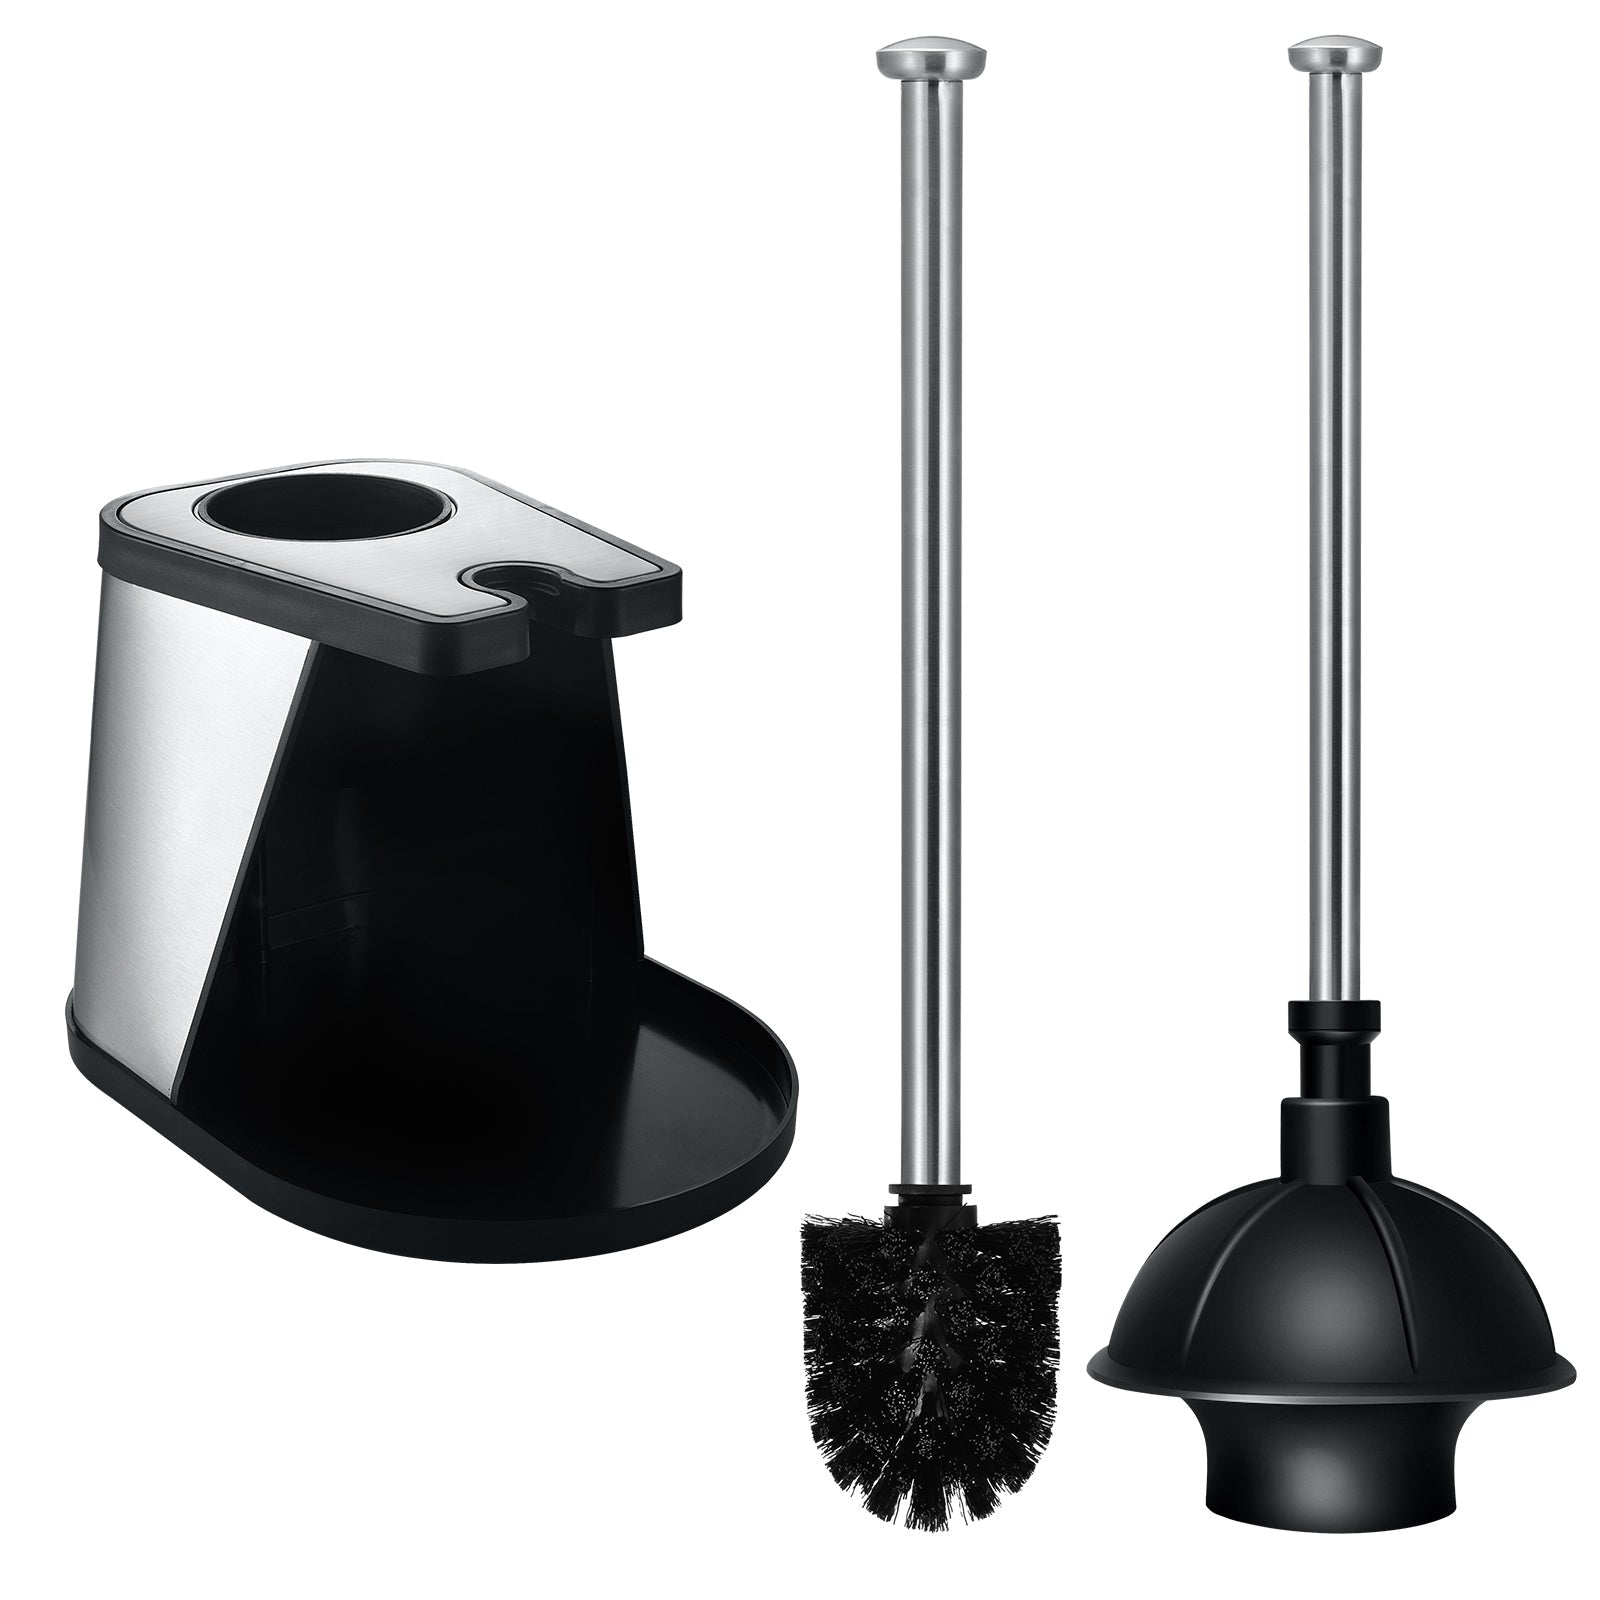 https://cdn.shopify.com/s/files/1/0016/1565/9082/products/toilettree-toilet-brush-and-plunger-set-ttp-pbc-1-34445466337526.jpg?v=1656429118